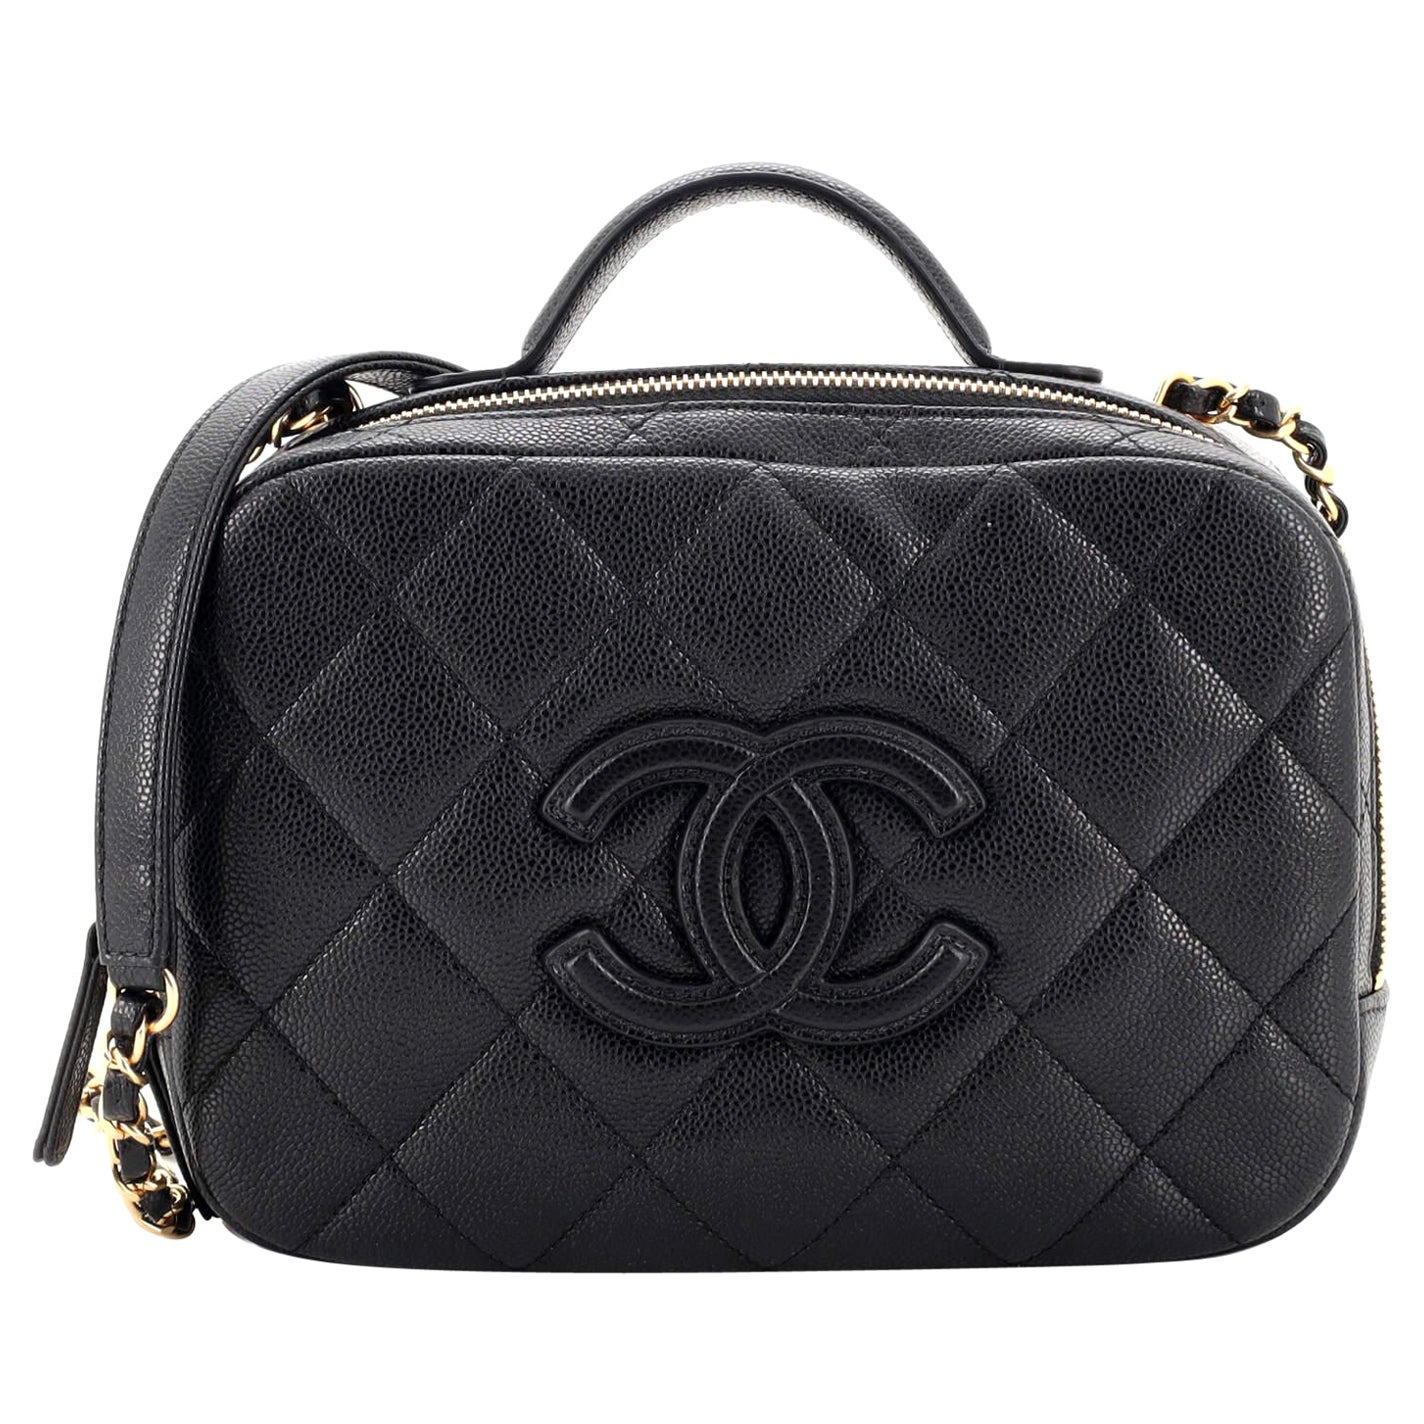 chance chanel for women